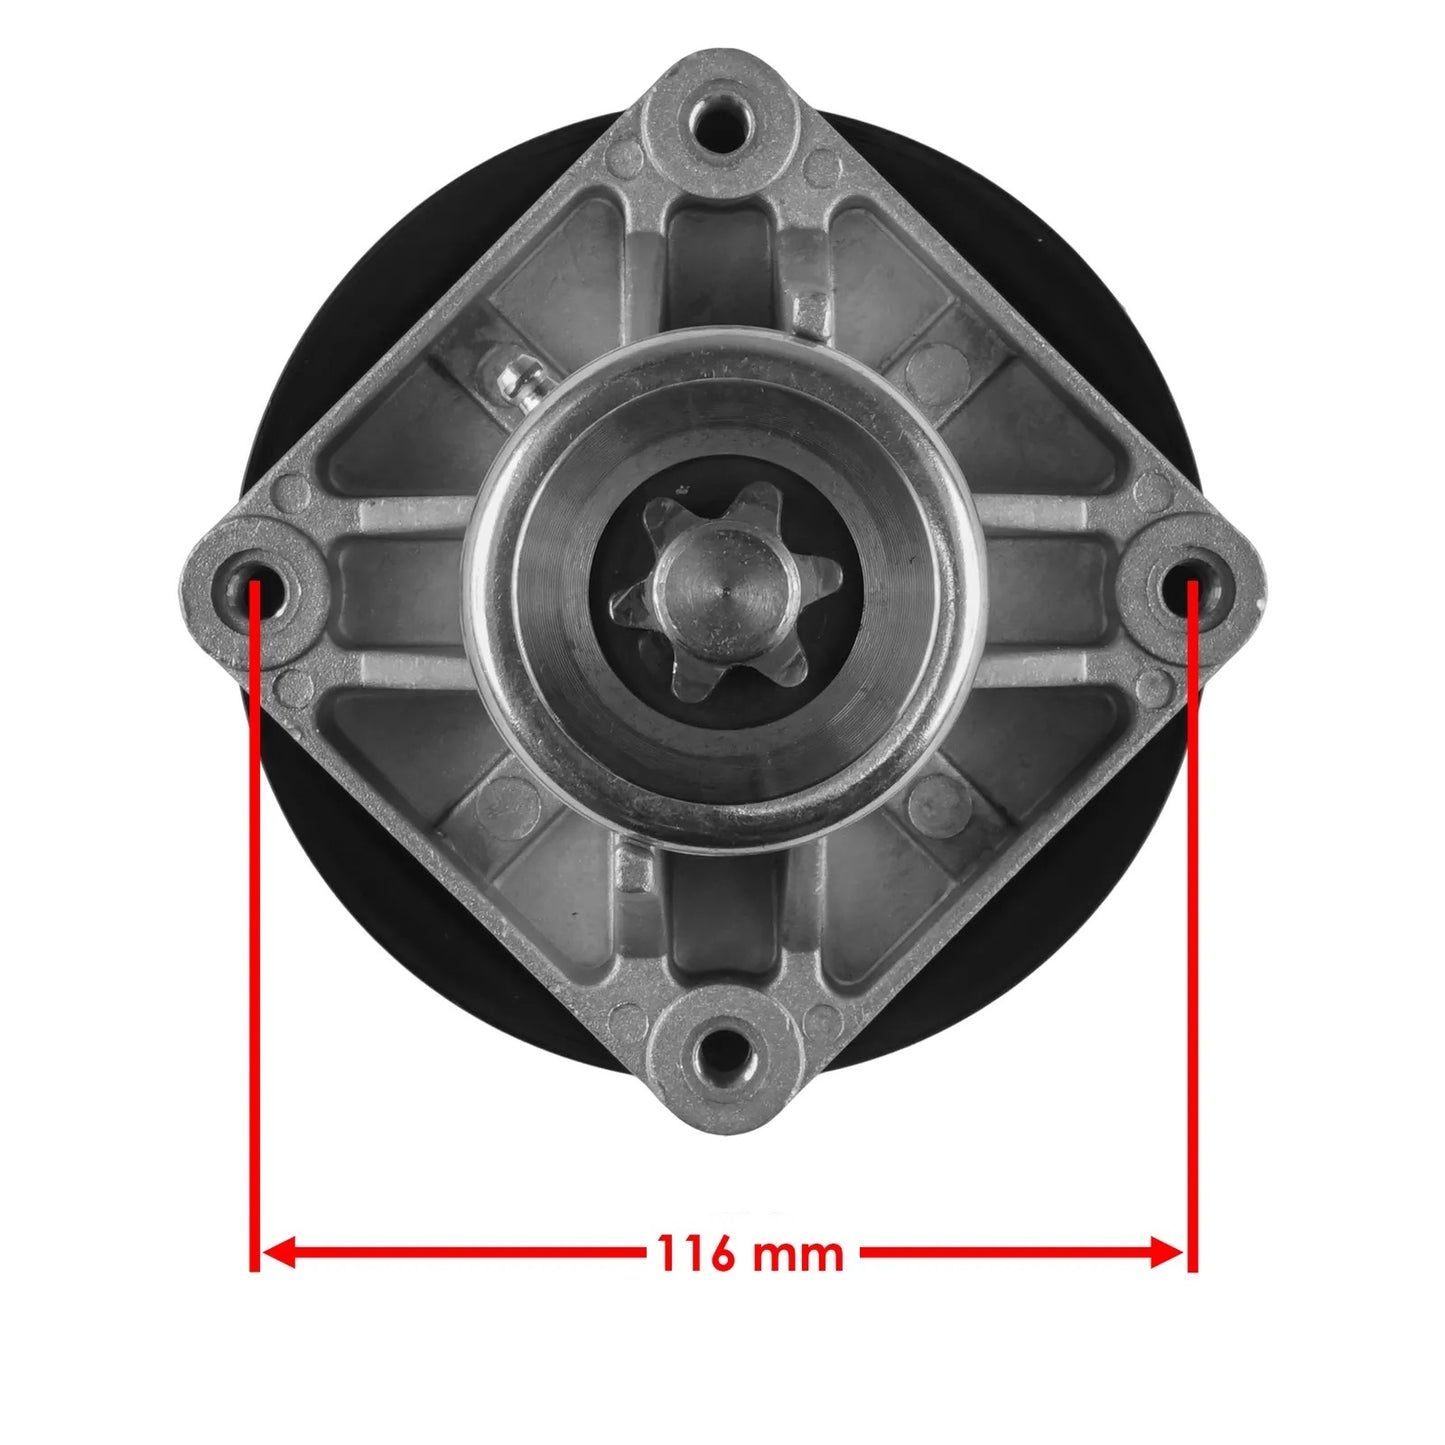 Spindle Assembly for MTD 46" 618-0240